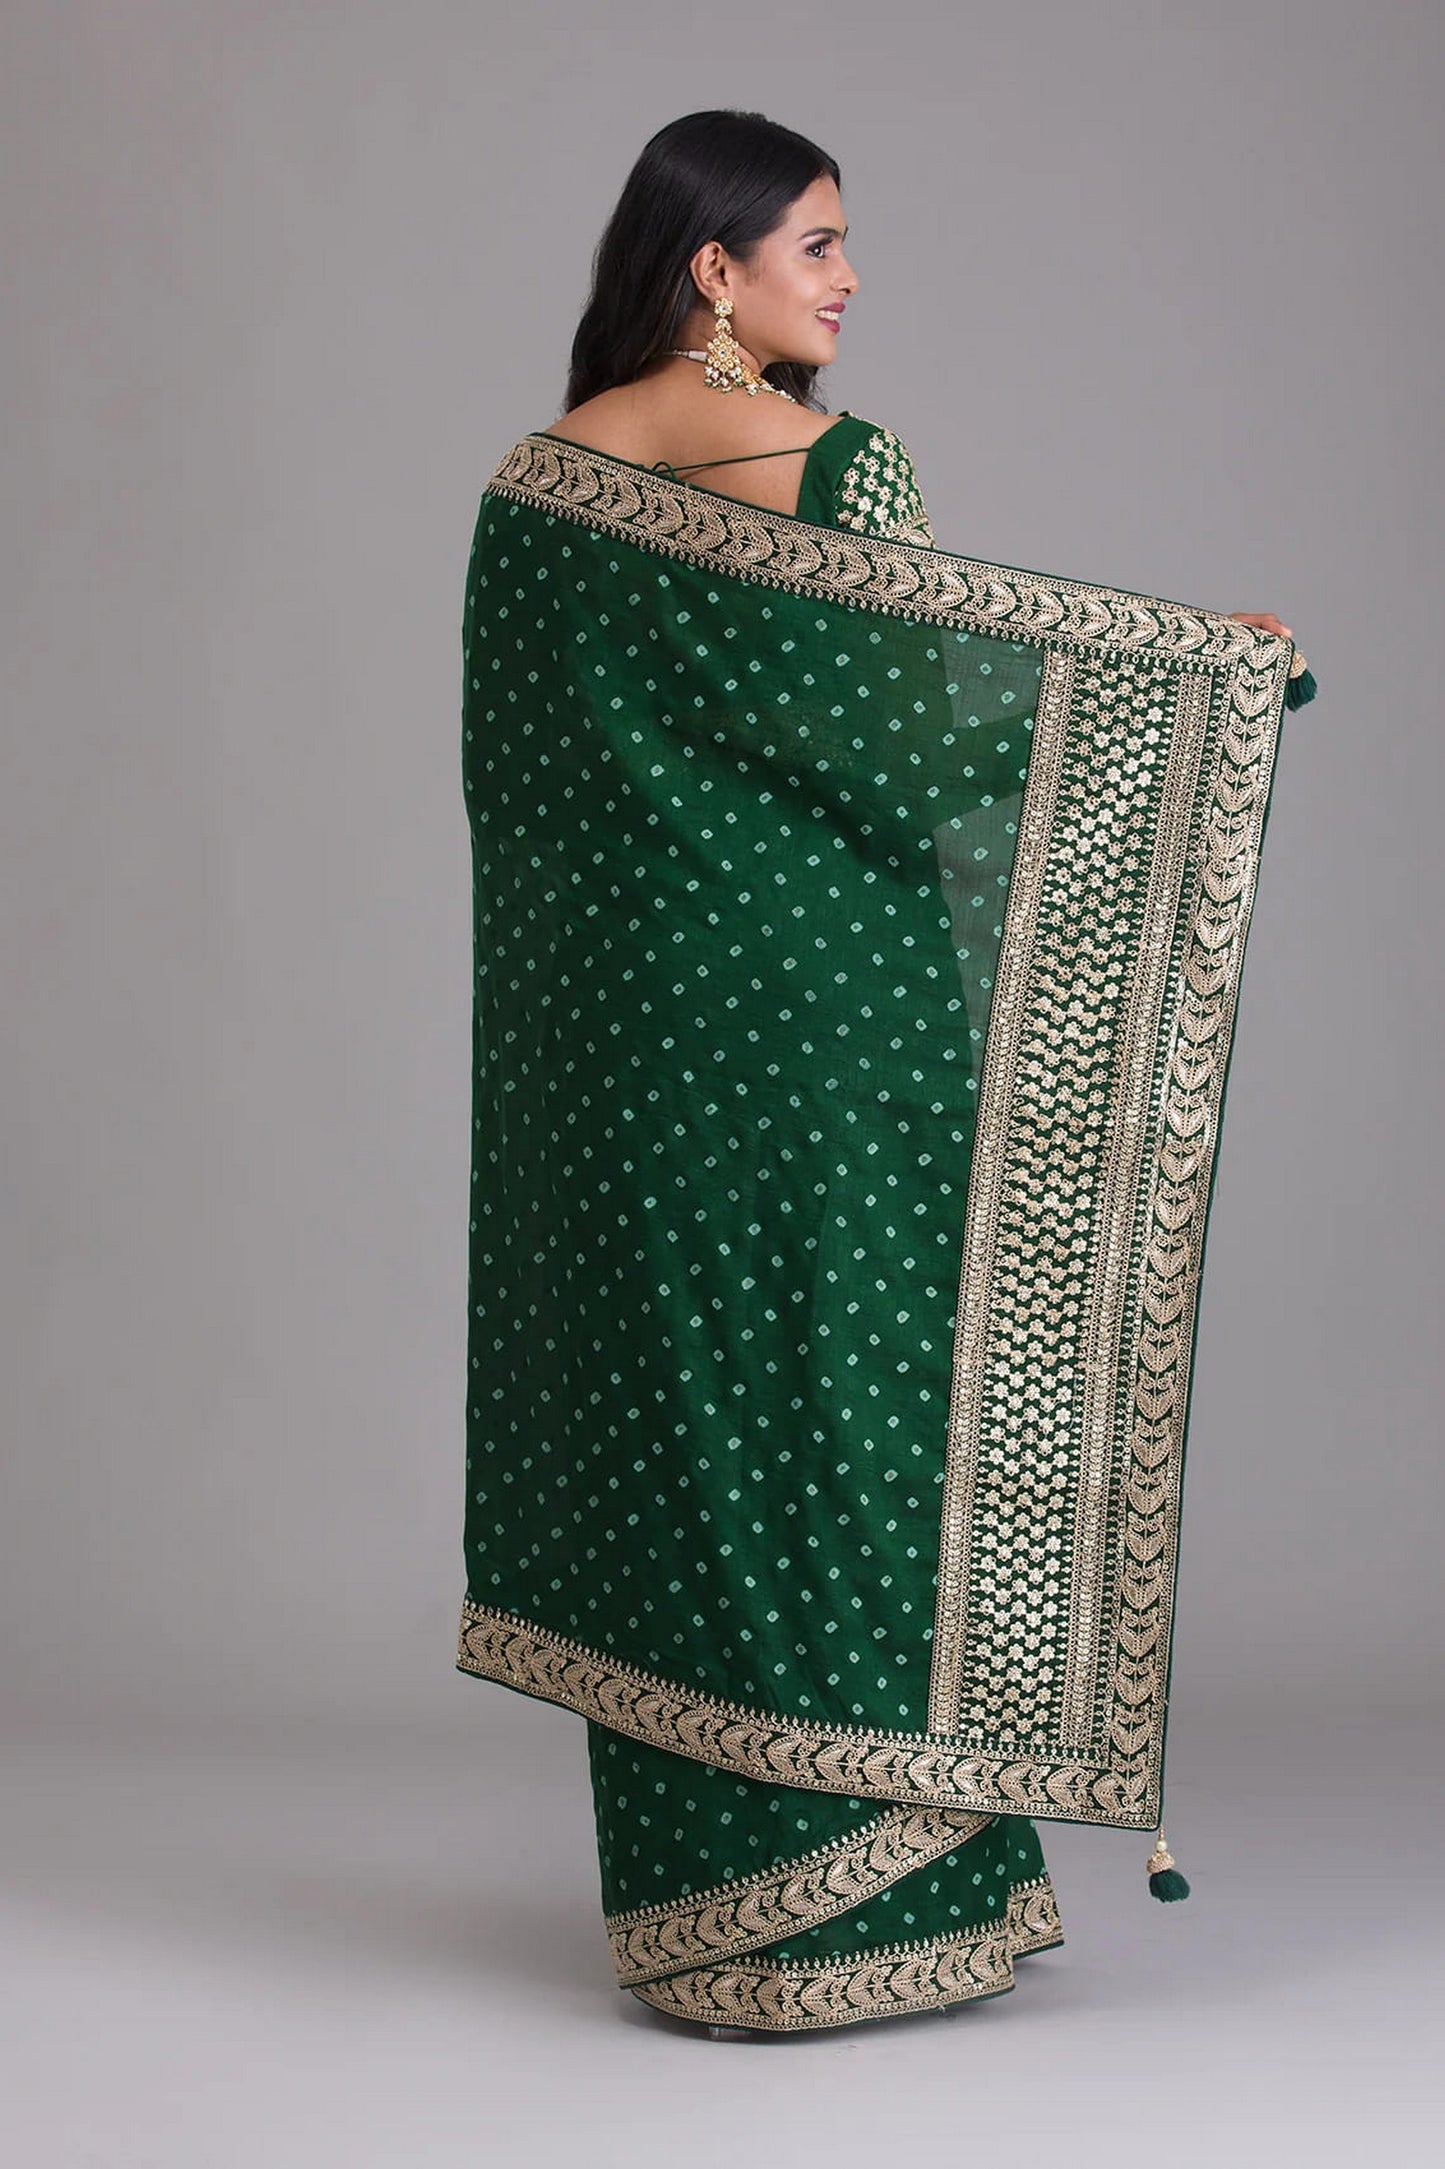 Green Indian Georgette Saree For Indian Festivals & Weddings - Sequence Embroidery Work, Dori Work